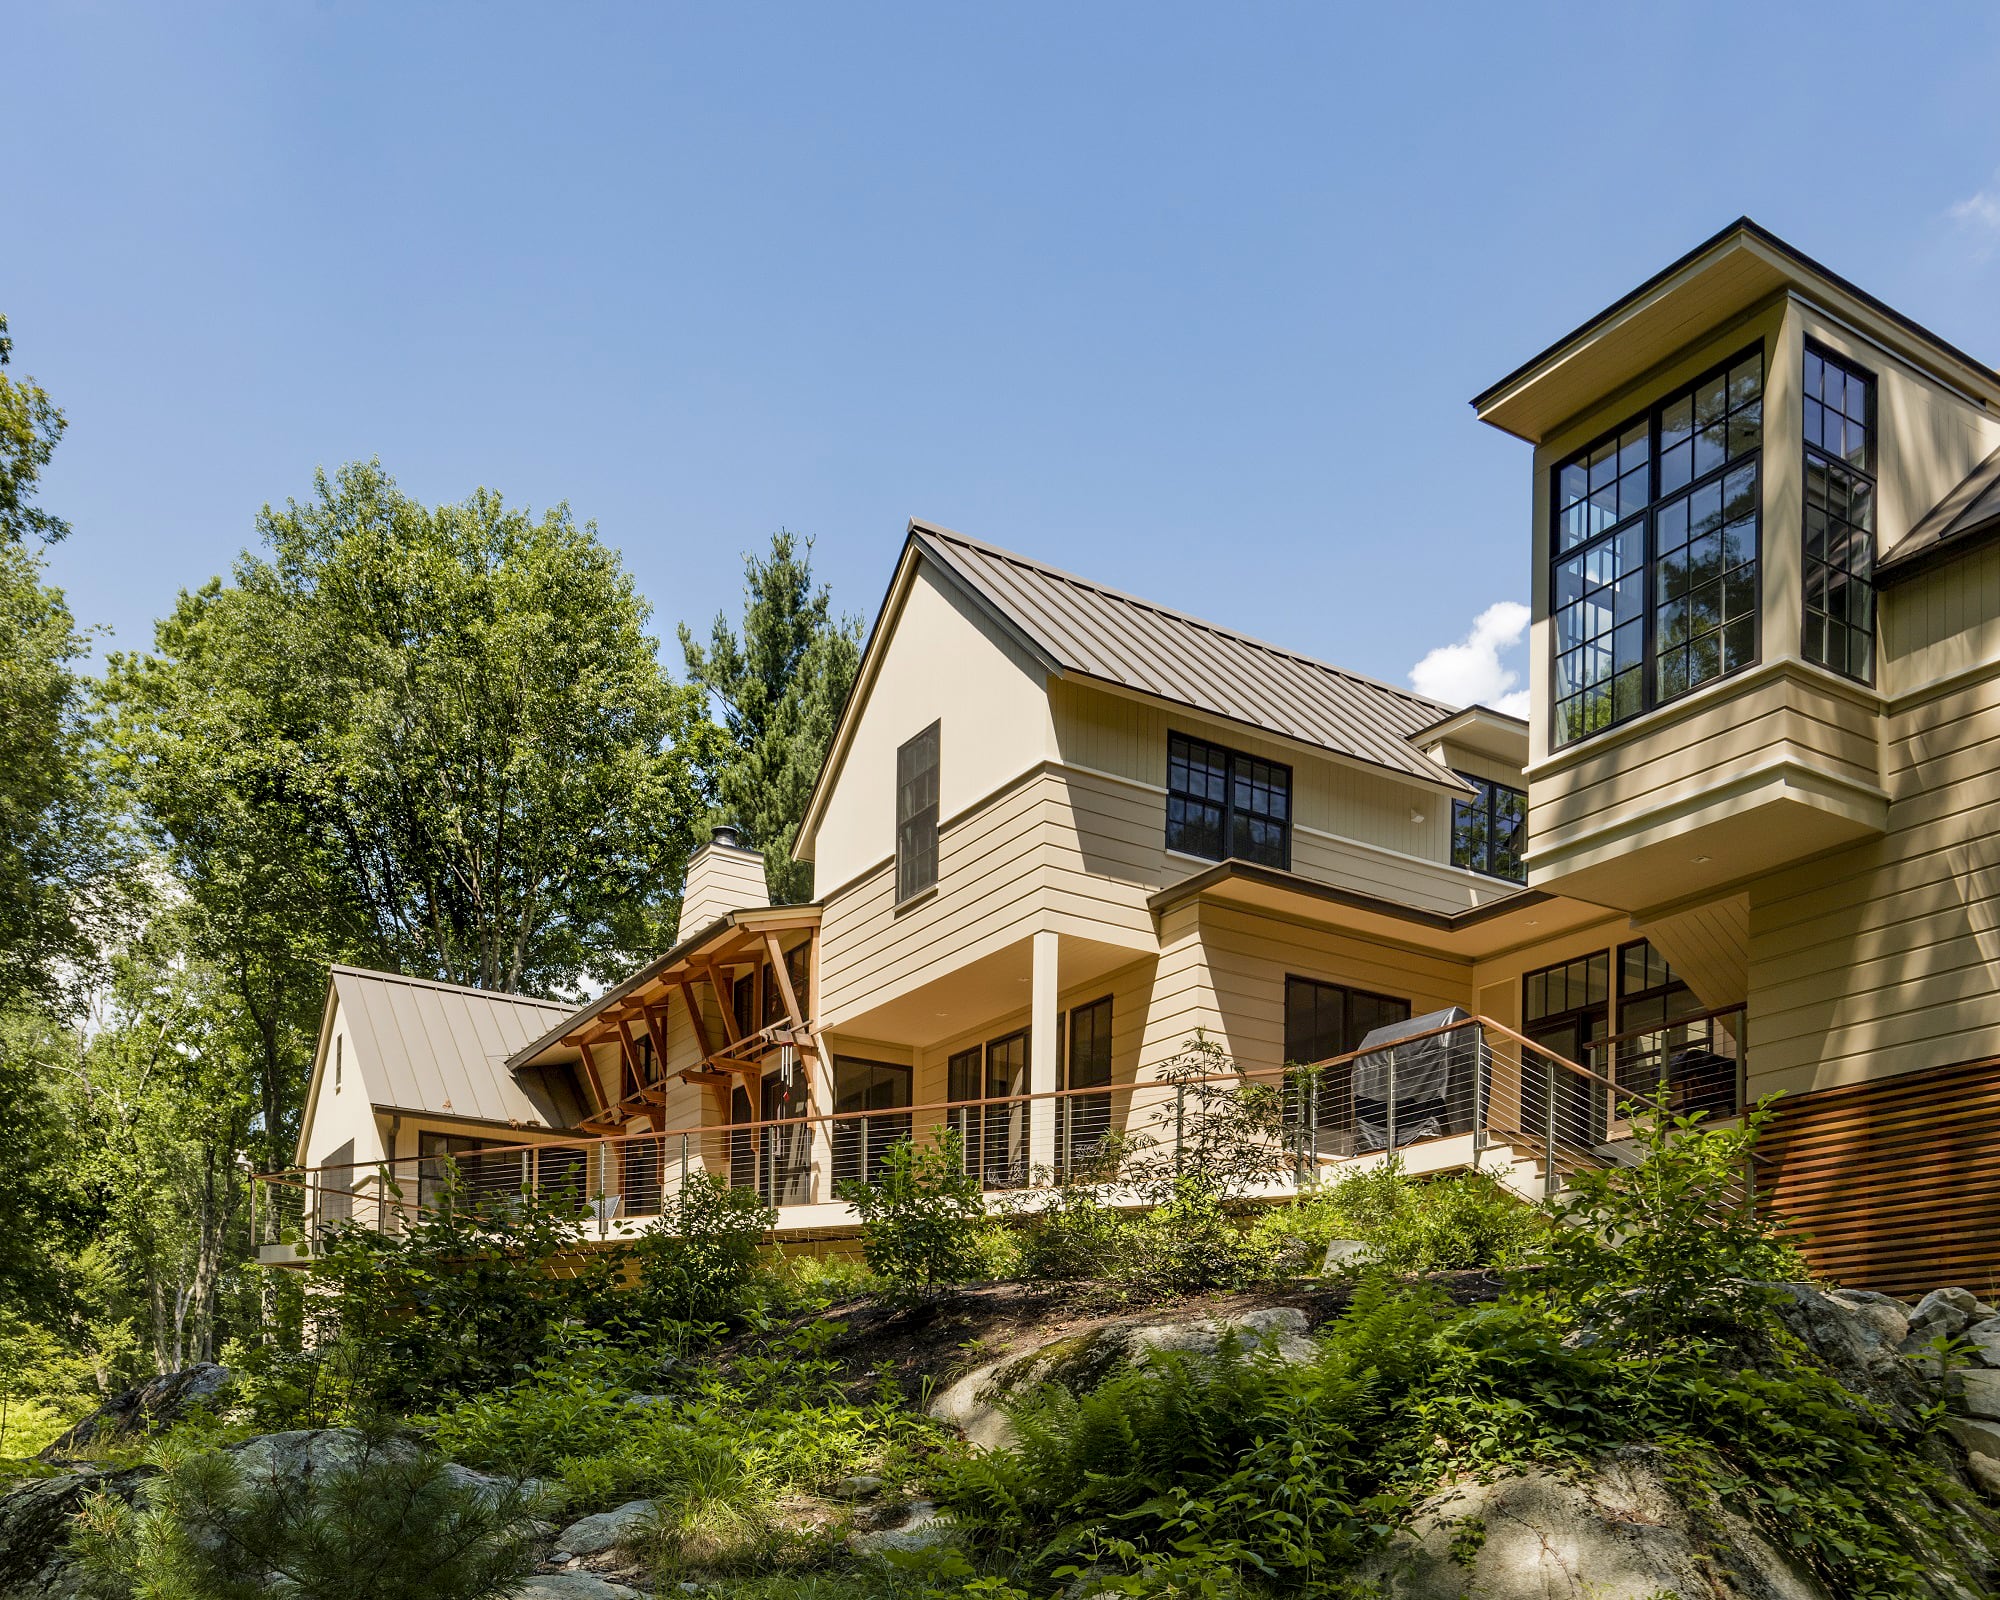 Dover Retreat - Residential Architecture